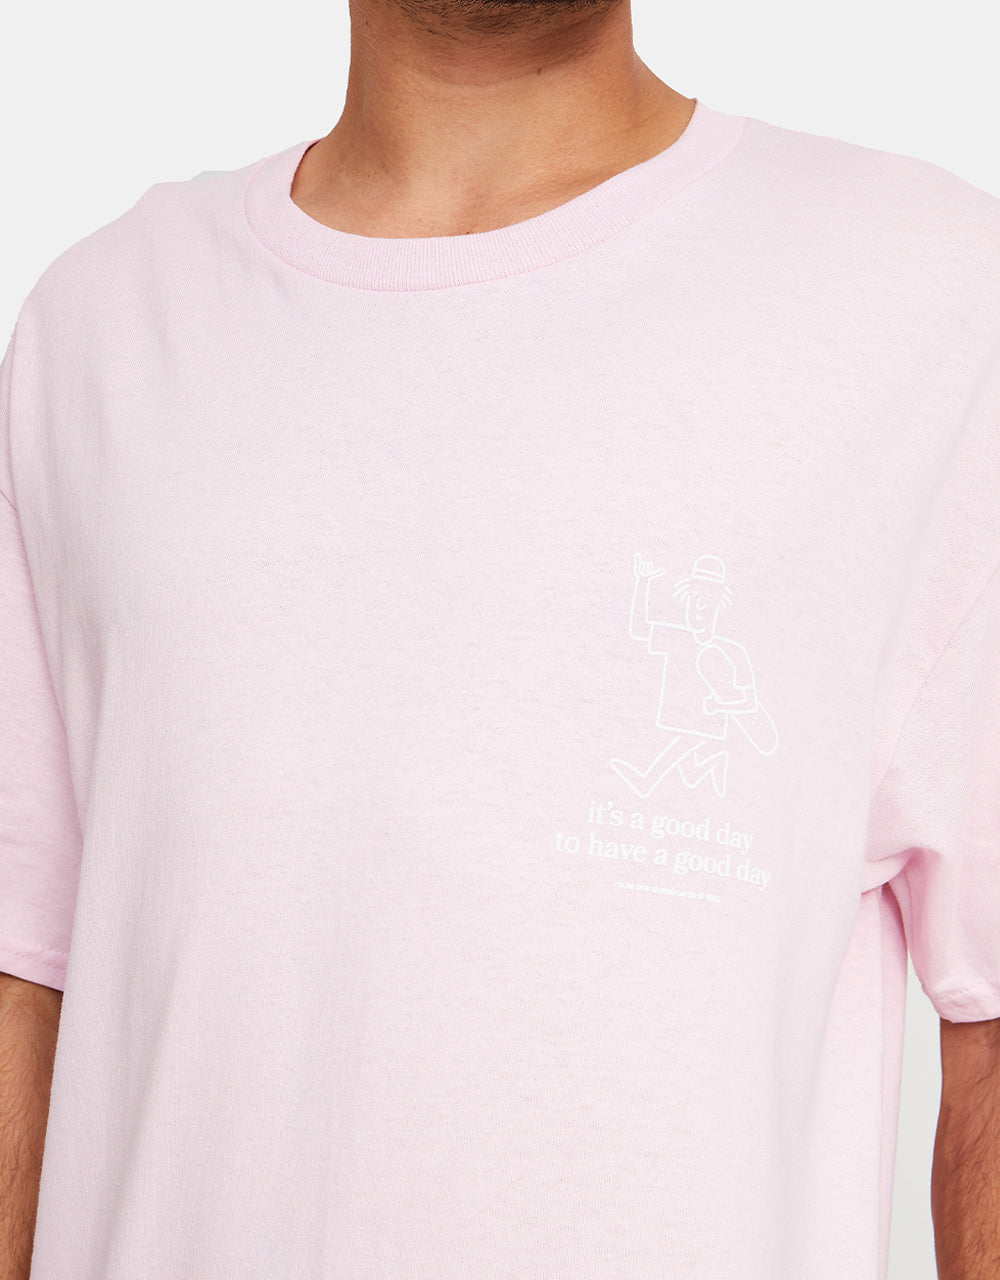 Route One It's A Good Day T-Shirt - Light Pink